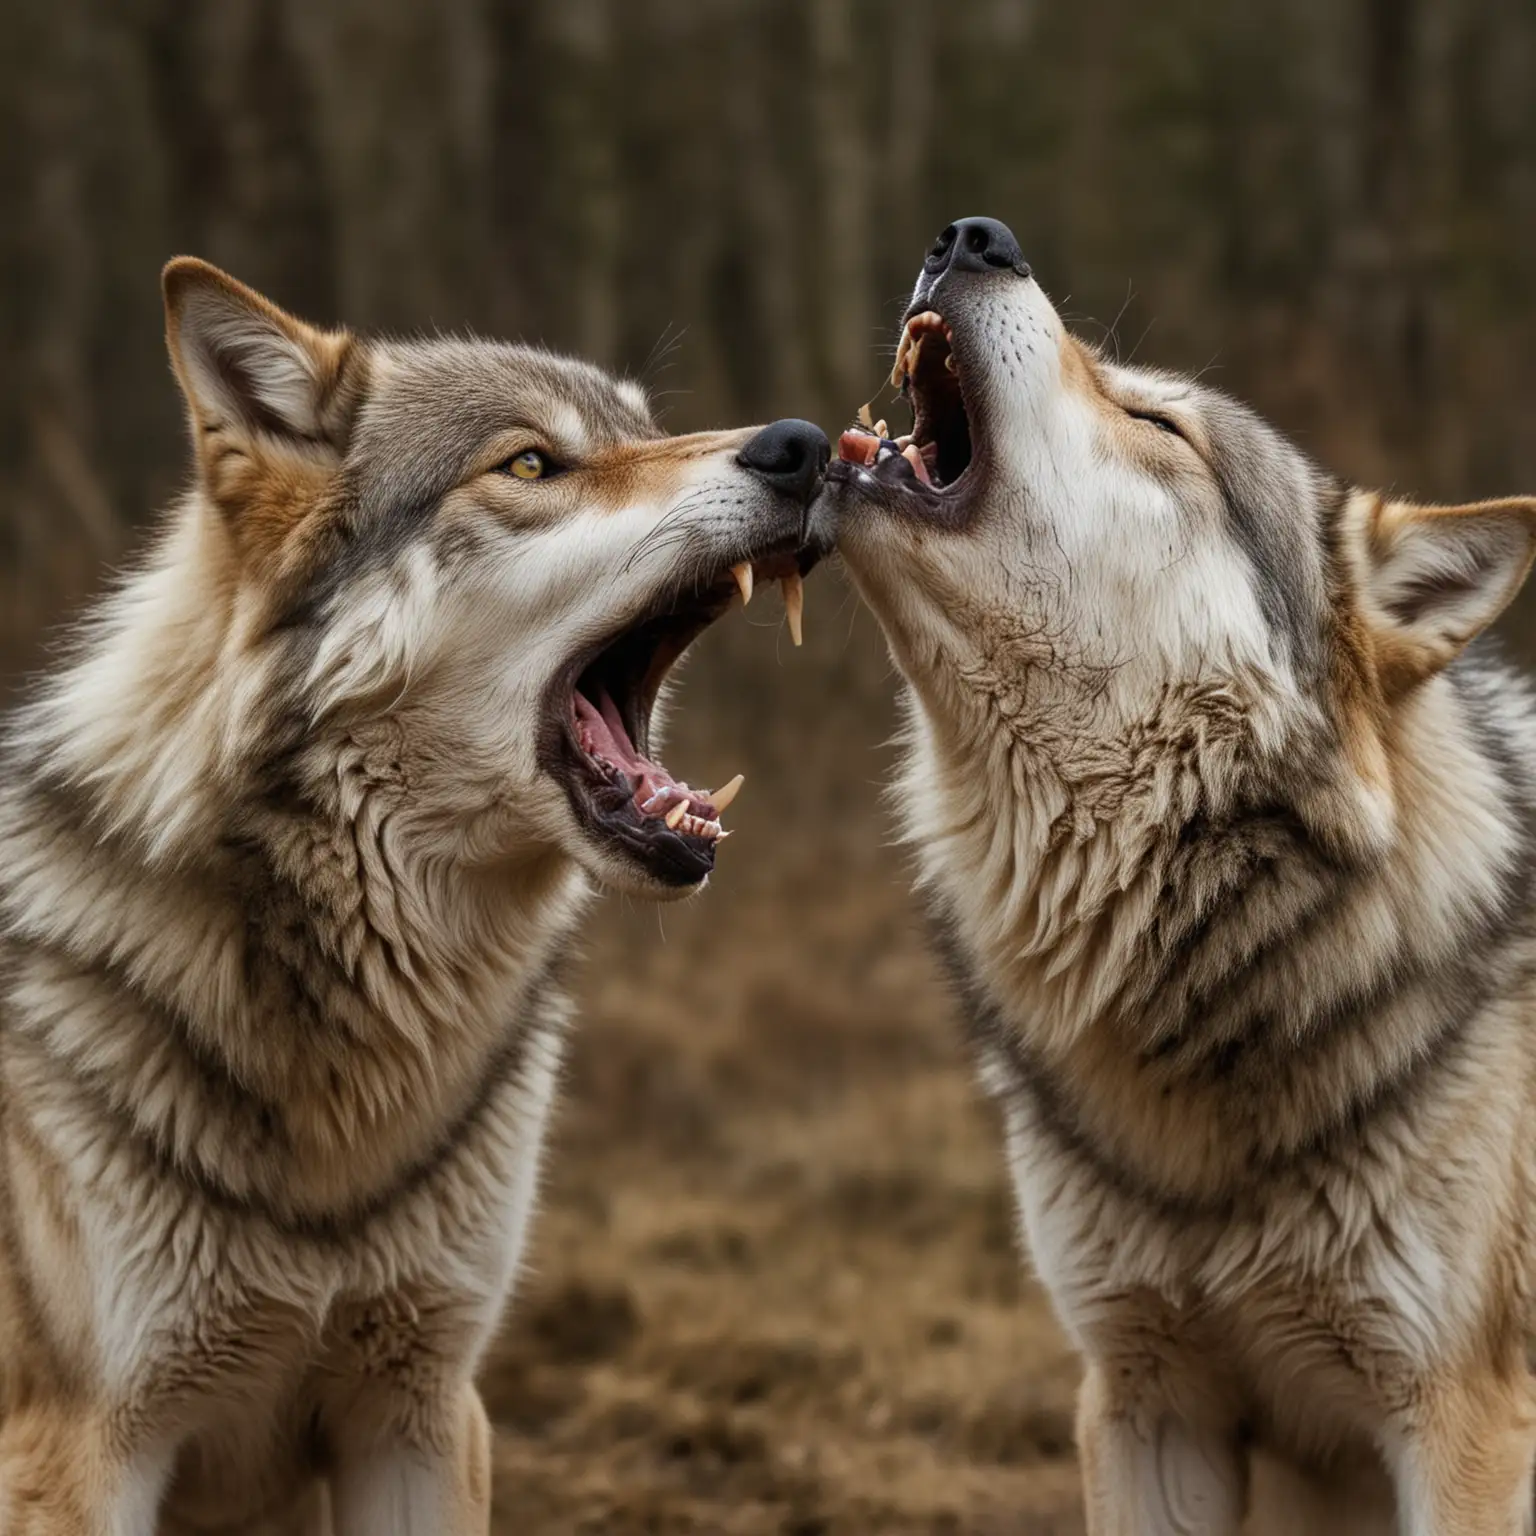 Two wolves, side by side, with their mouths open